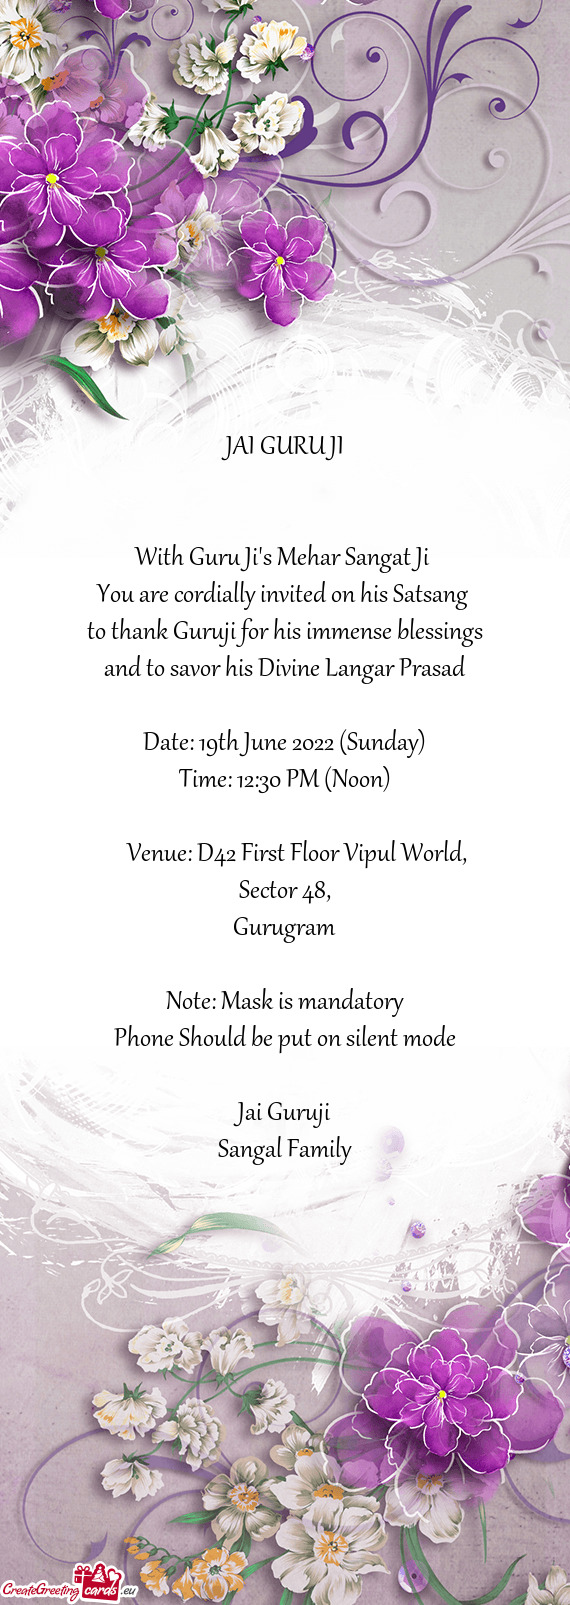 You are cordially invited on his Satsang